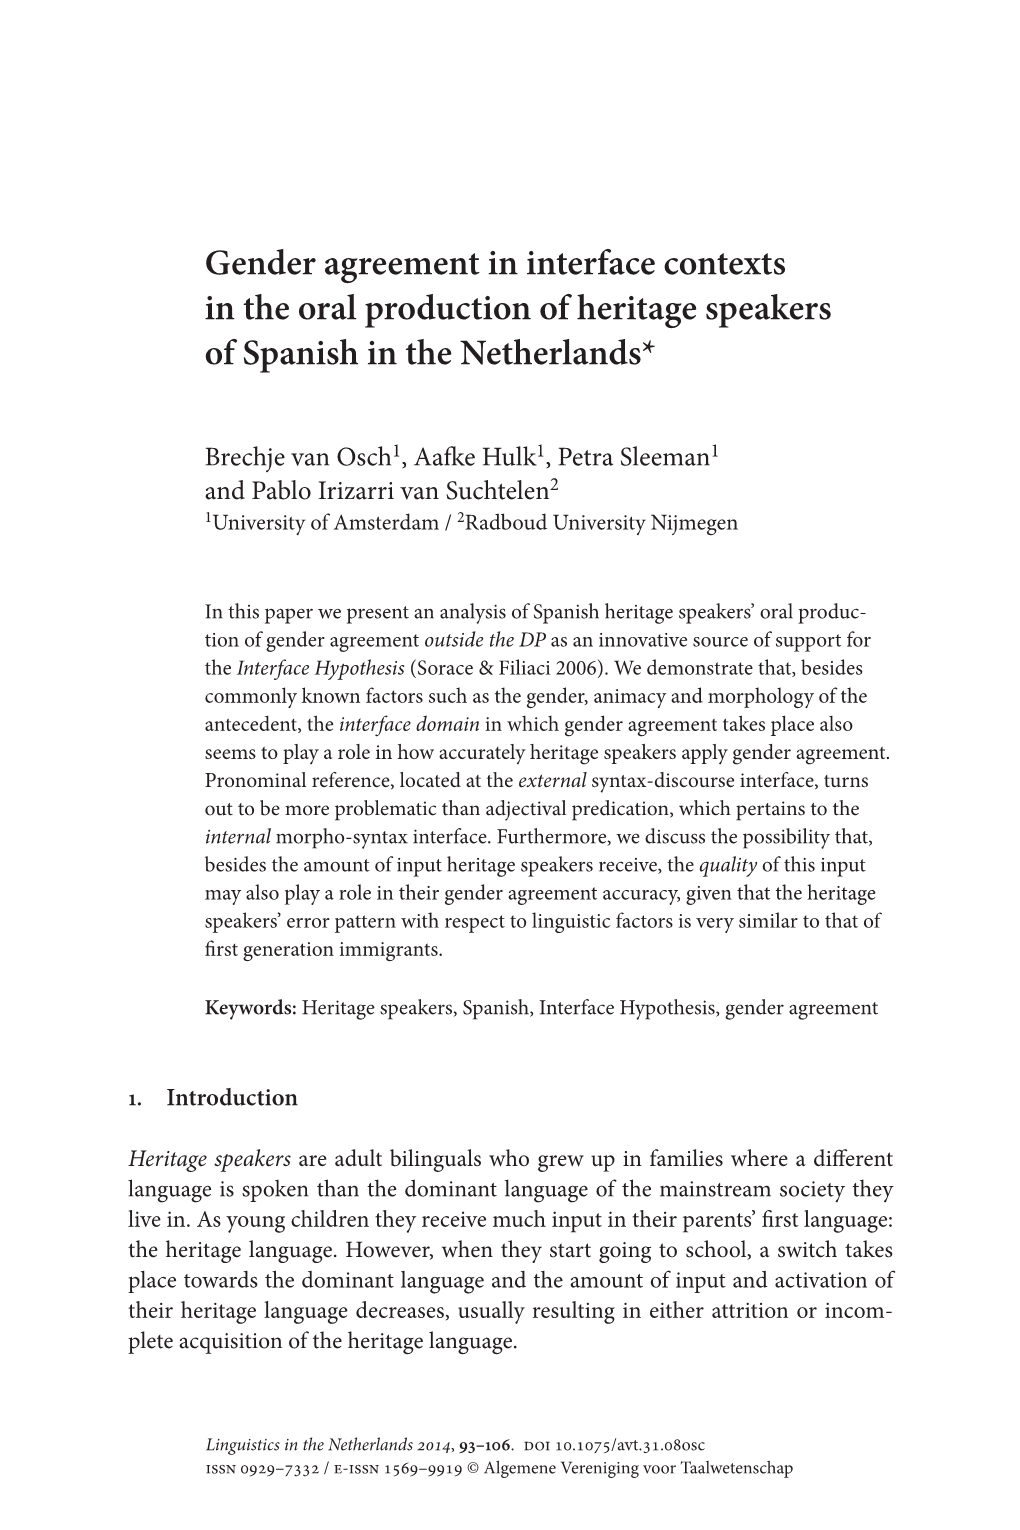 Gender Agreement in Interface Contexts in the Oral Production of Heritage Speakers of Spanish in the Netherlands*